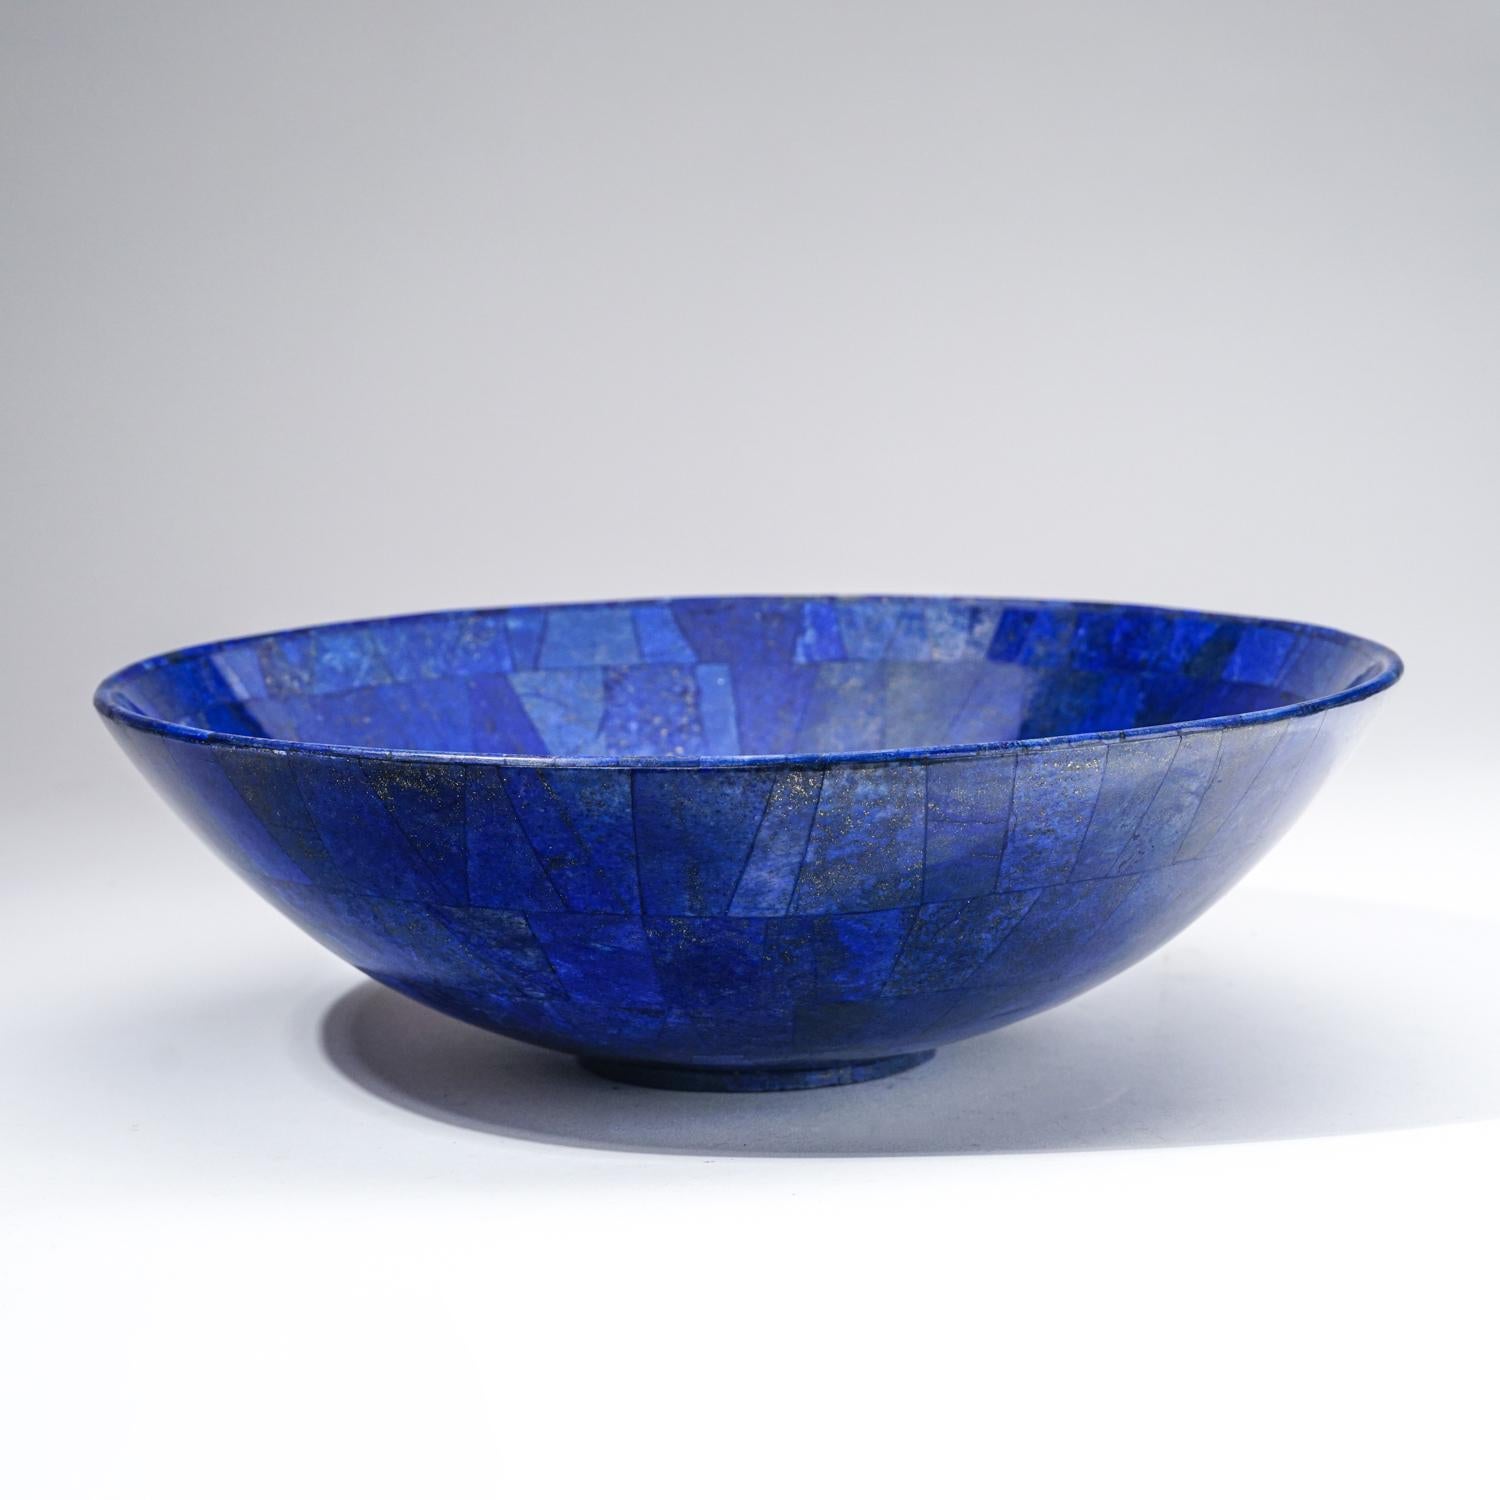 AAA quality hand-polished natural Lapis Lazuli bowl from Afghanistan.  This specimen has rich, electric-royal blue color enriched with scintillating pyrite microcrystals. This extra grade lapis bowl is a wonderful example and would make a lovely